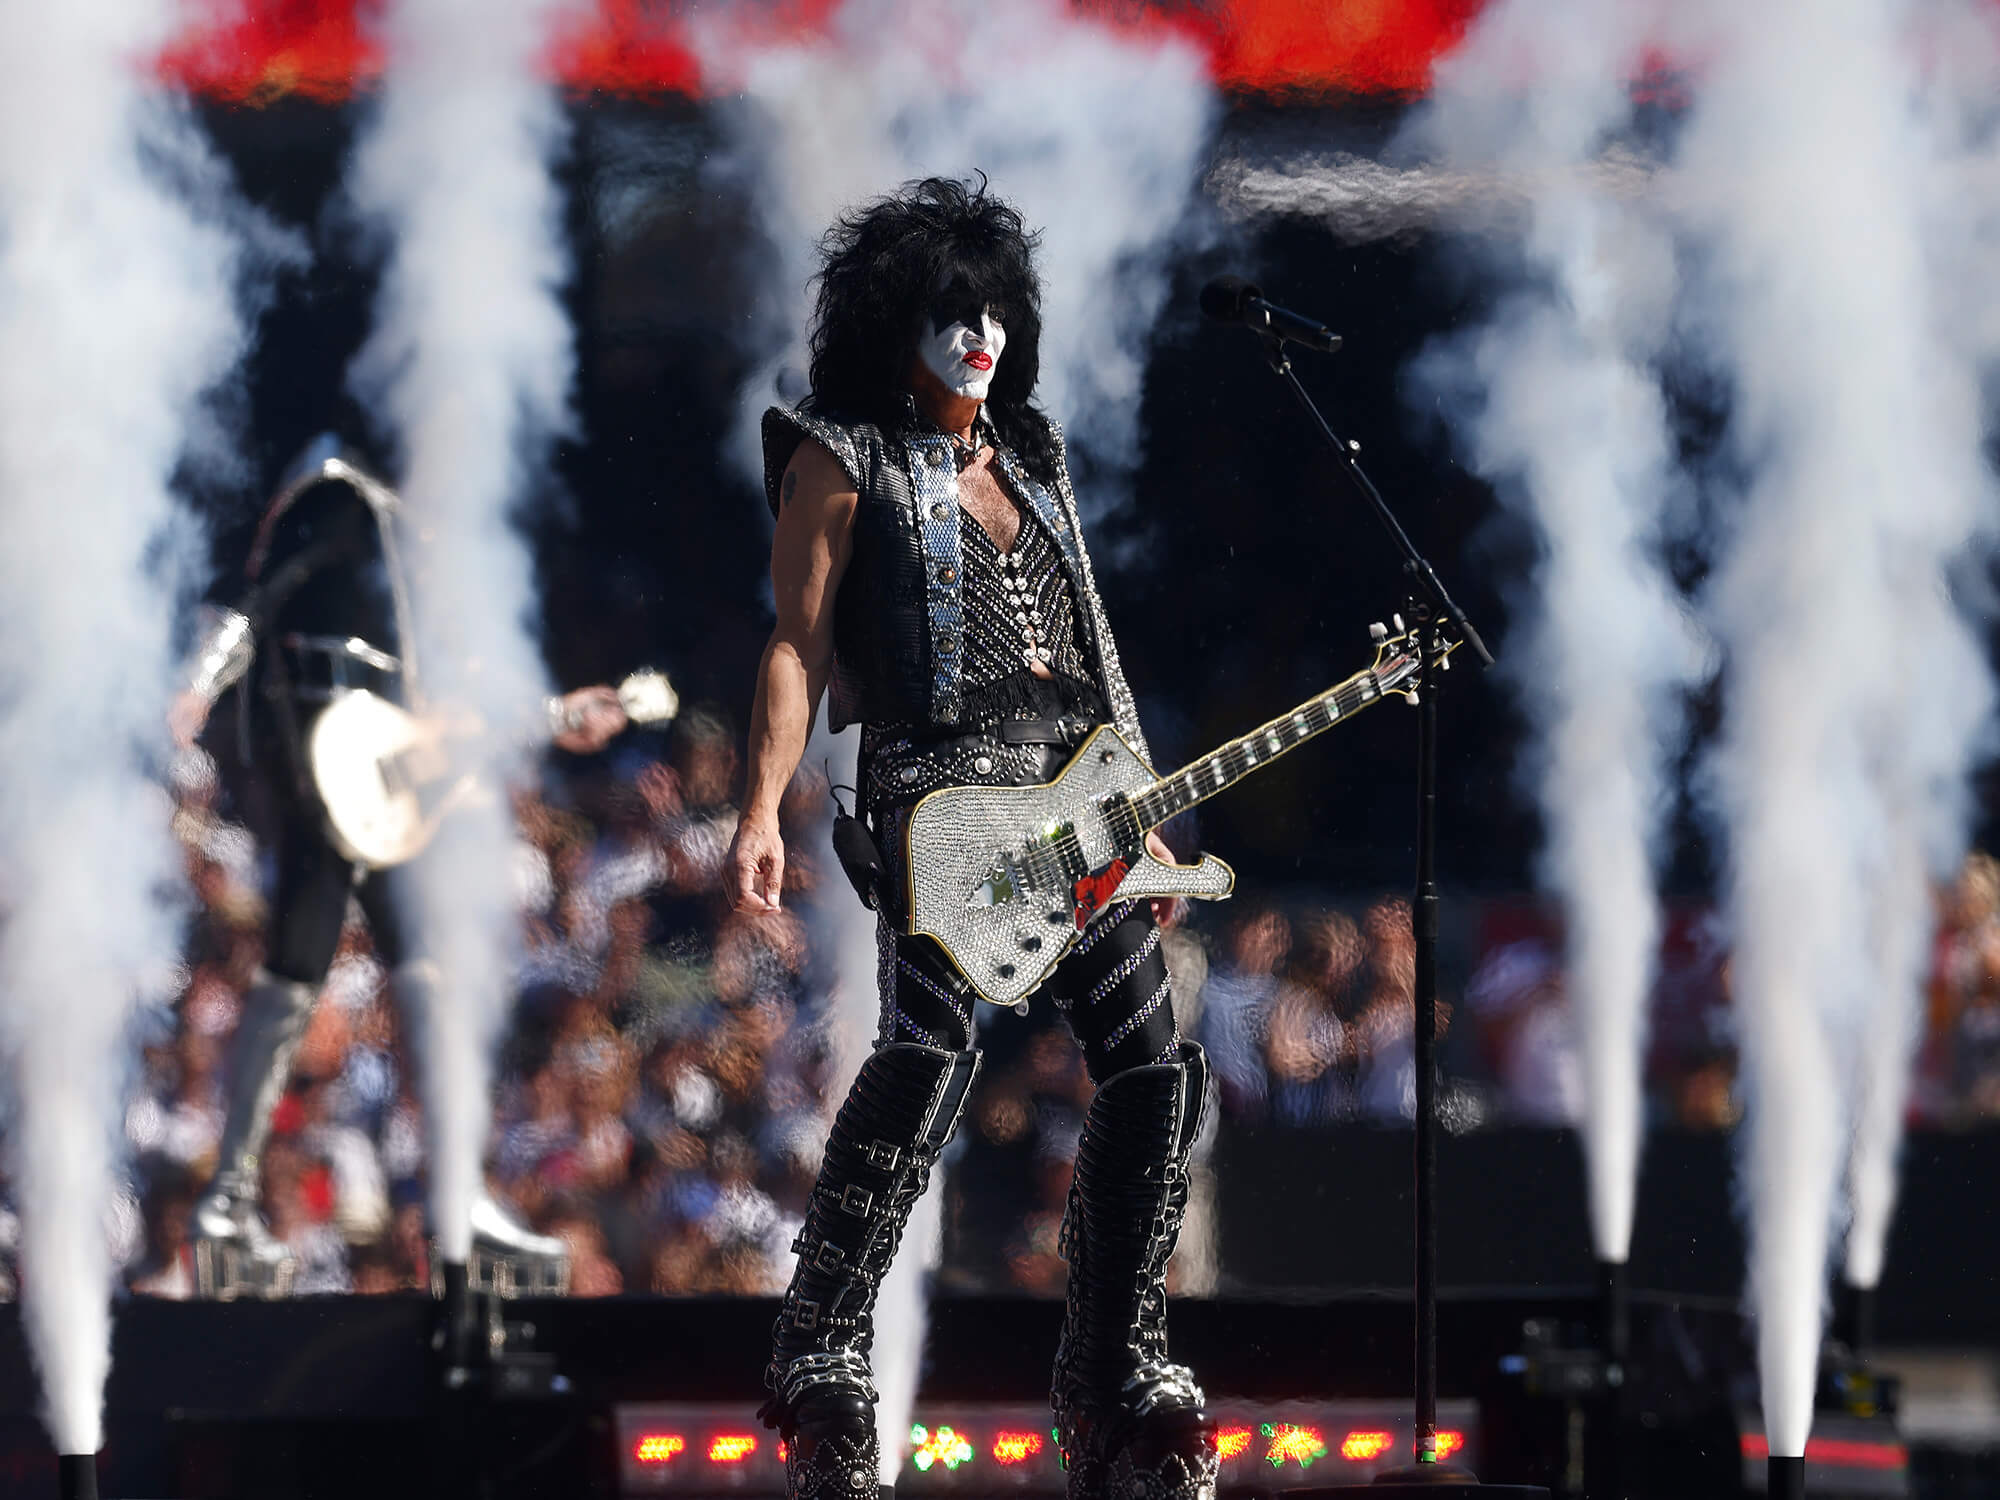 Paul Stanley on stage with his bejewelled guitar. He wears his signature white face paint, red lips and black eye make up. Smoke machines are going off behind him.